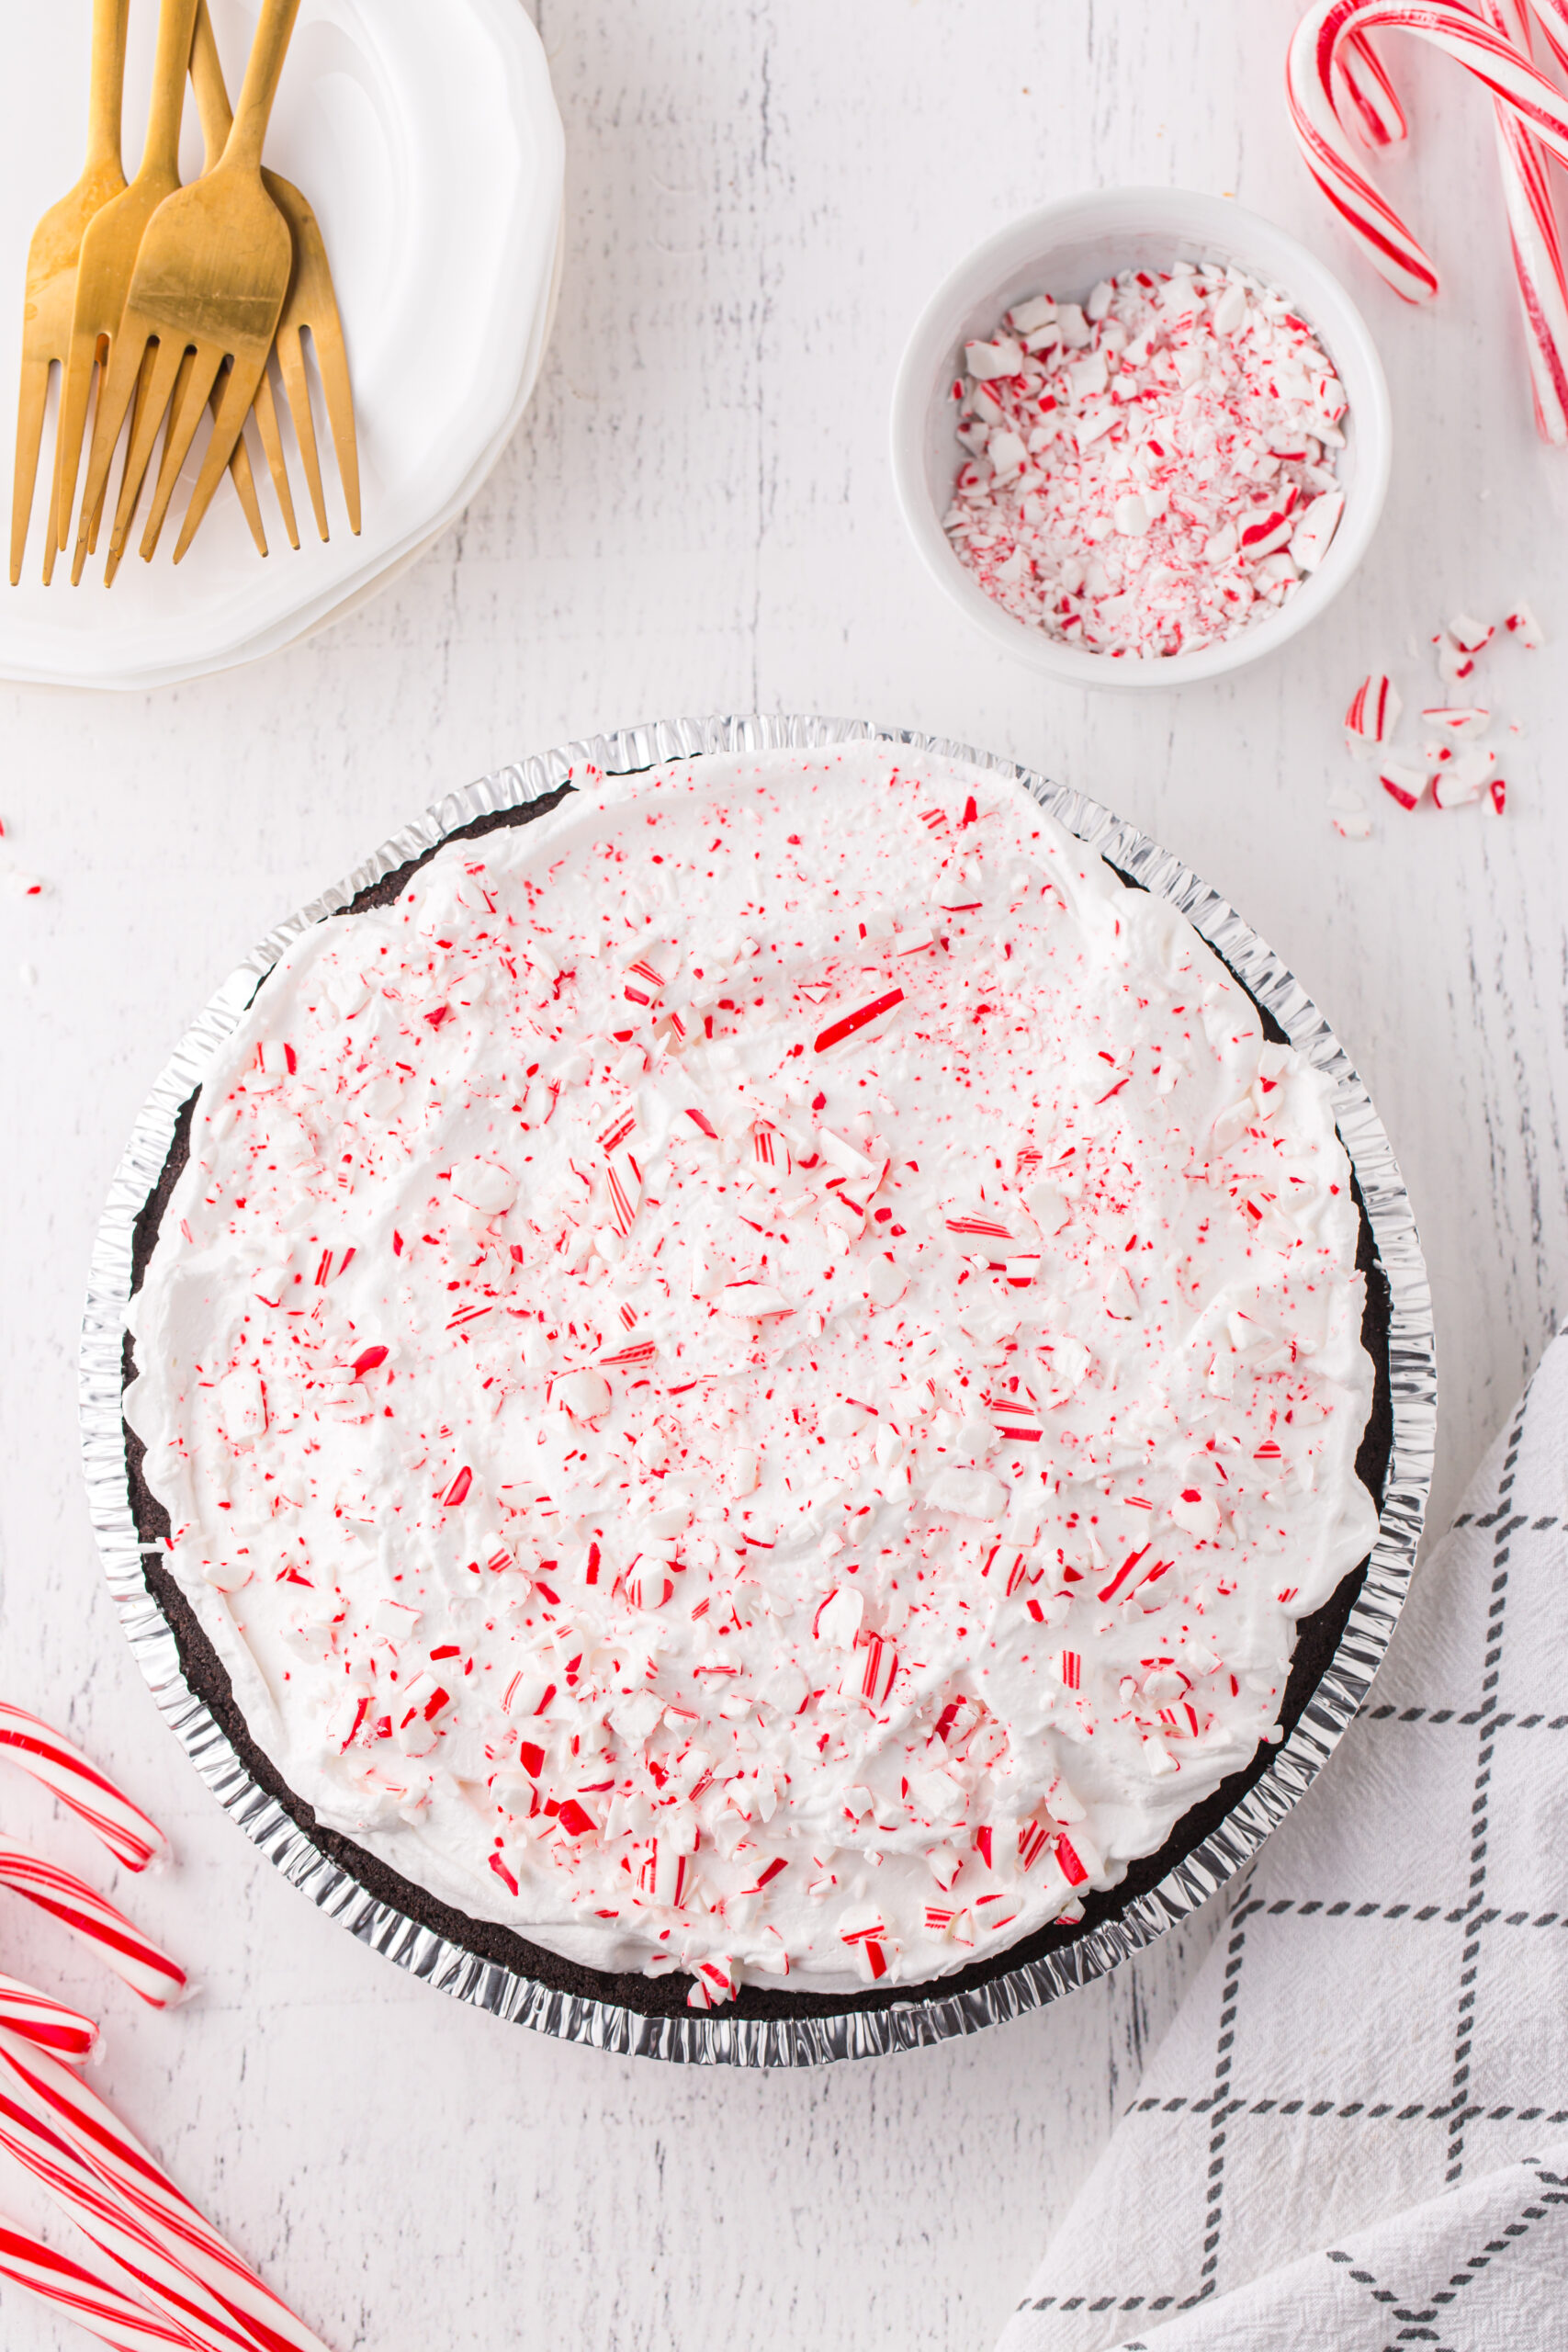 peppermint pie with whipped topping and crushed peppermint sprinkled over the top. small bowl of crushed peppermint, small plate with fold forks on top, whole candy canes and cloth napkin surrounding it.